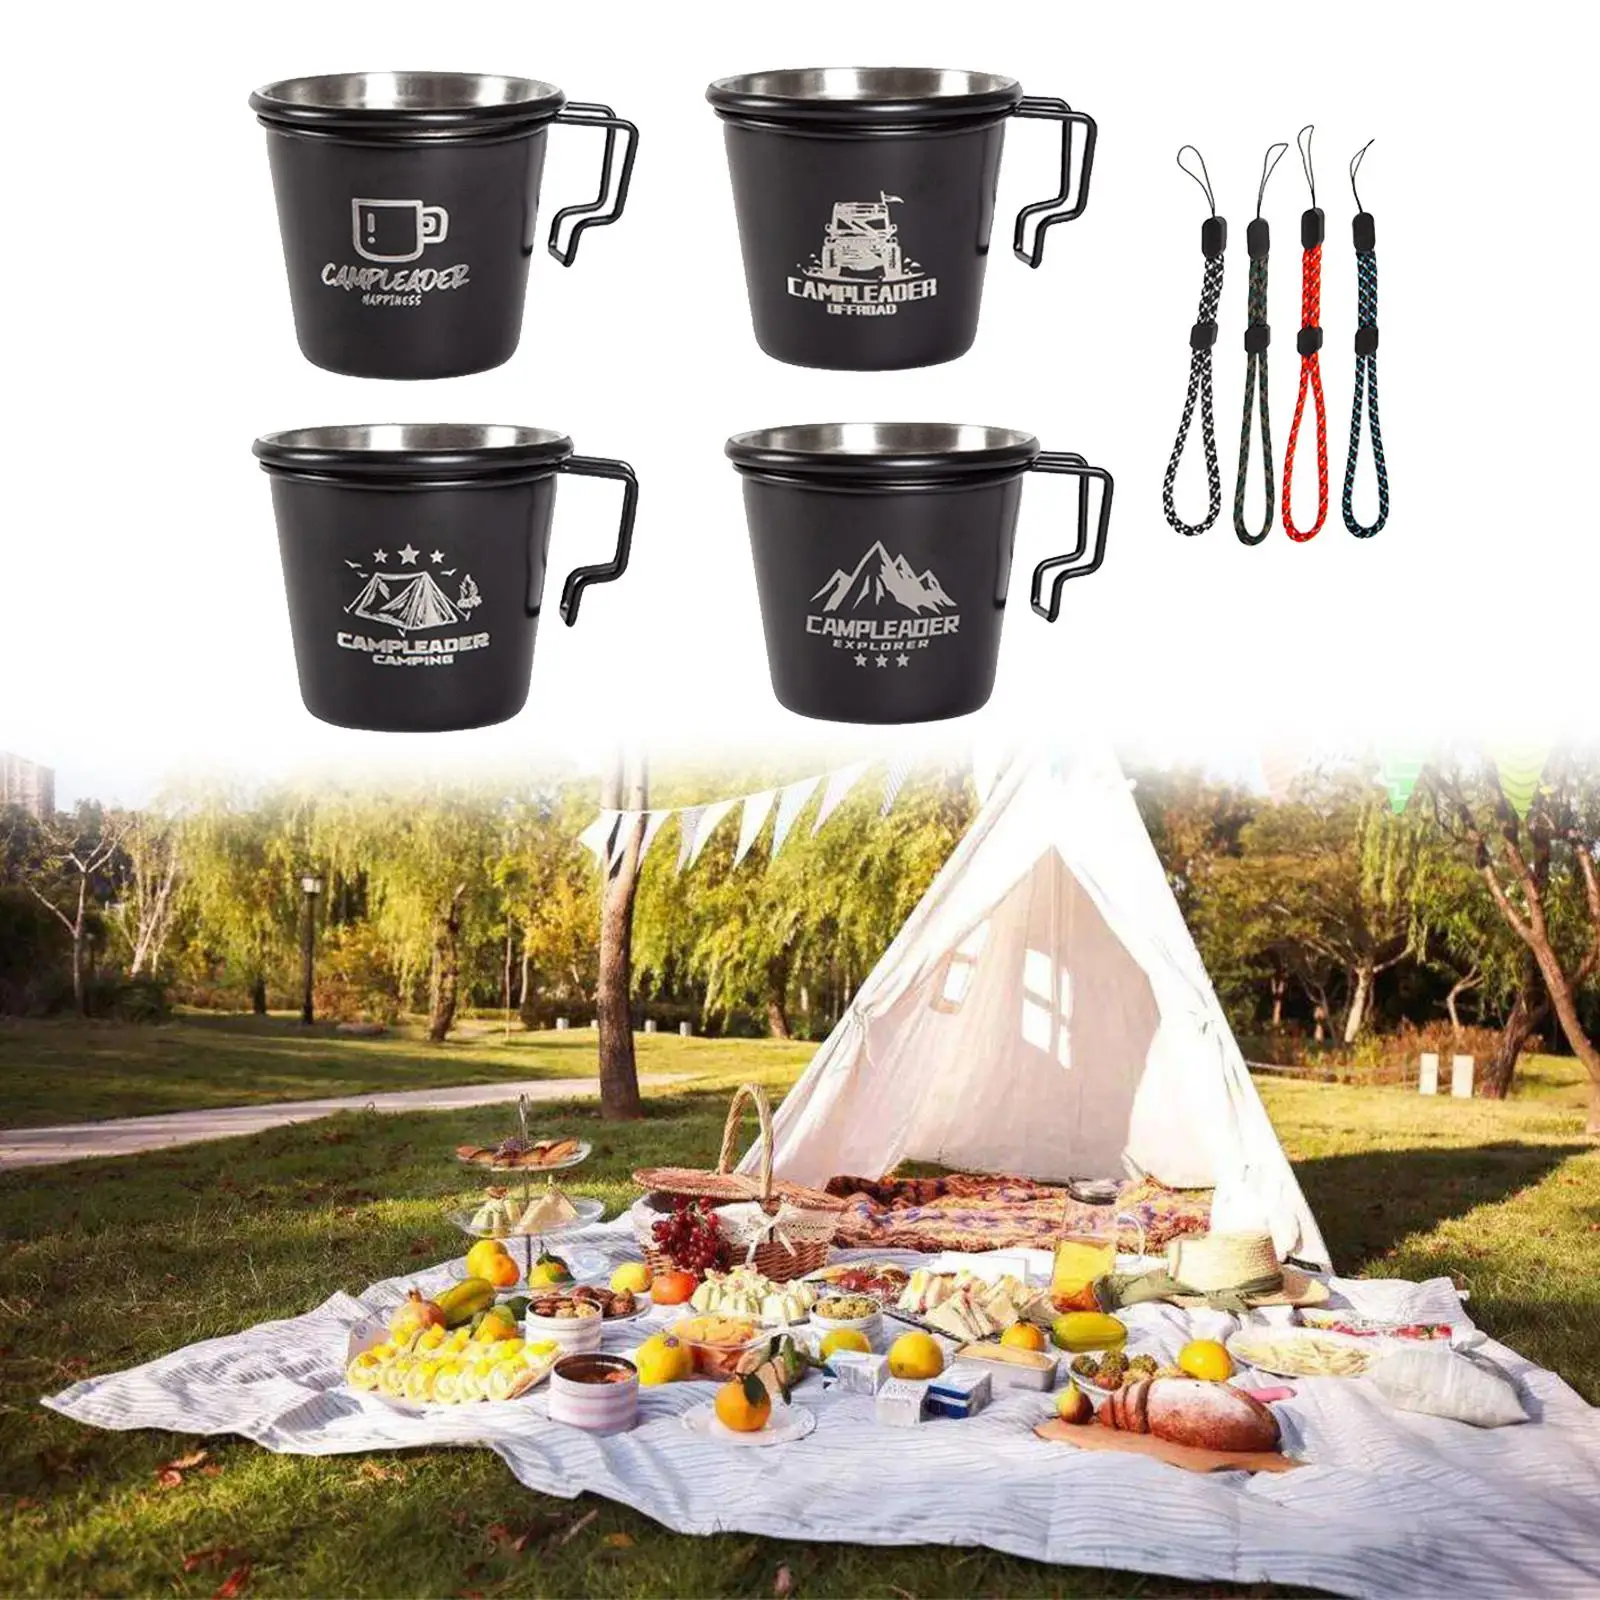 4pcs Outdoor 304 Stainless Steel Milk Cups w/ Hanging Rope Drinking Mugs for Camping Picnic BBQ Fishing Backpacking Hiking